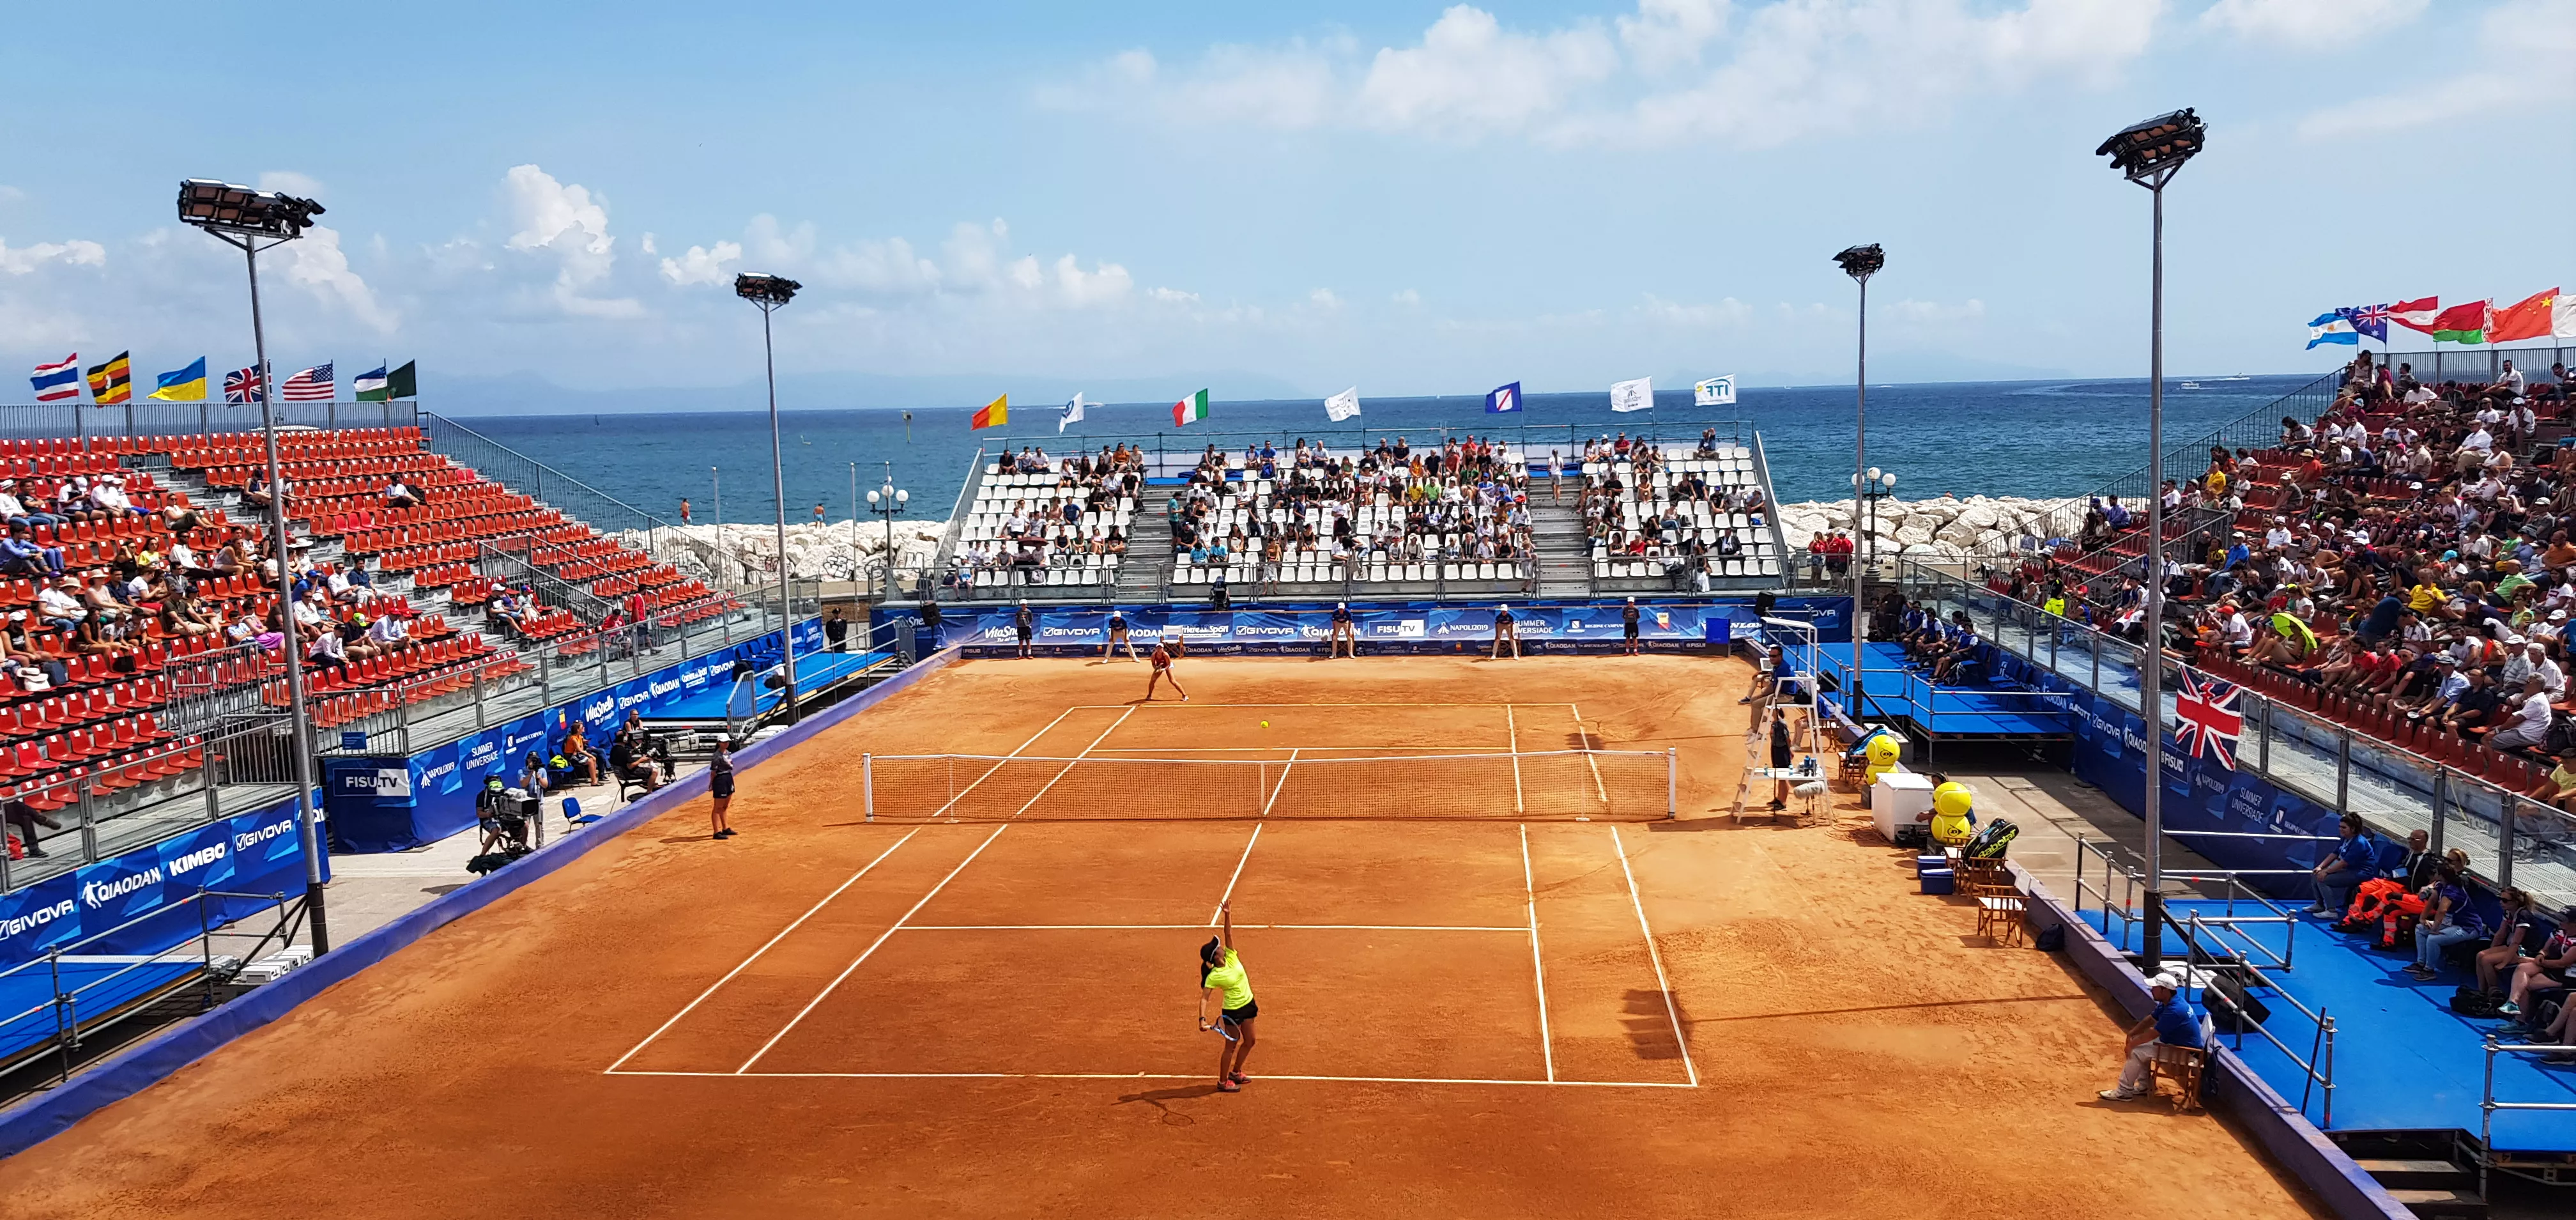 Naples Tennis Club in Italy, Europe | Tennis - Rated 4.4